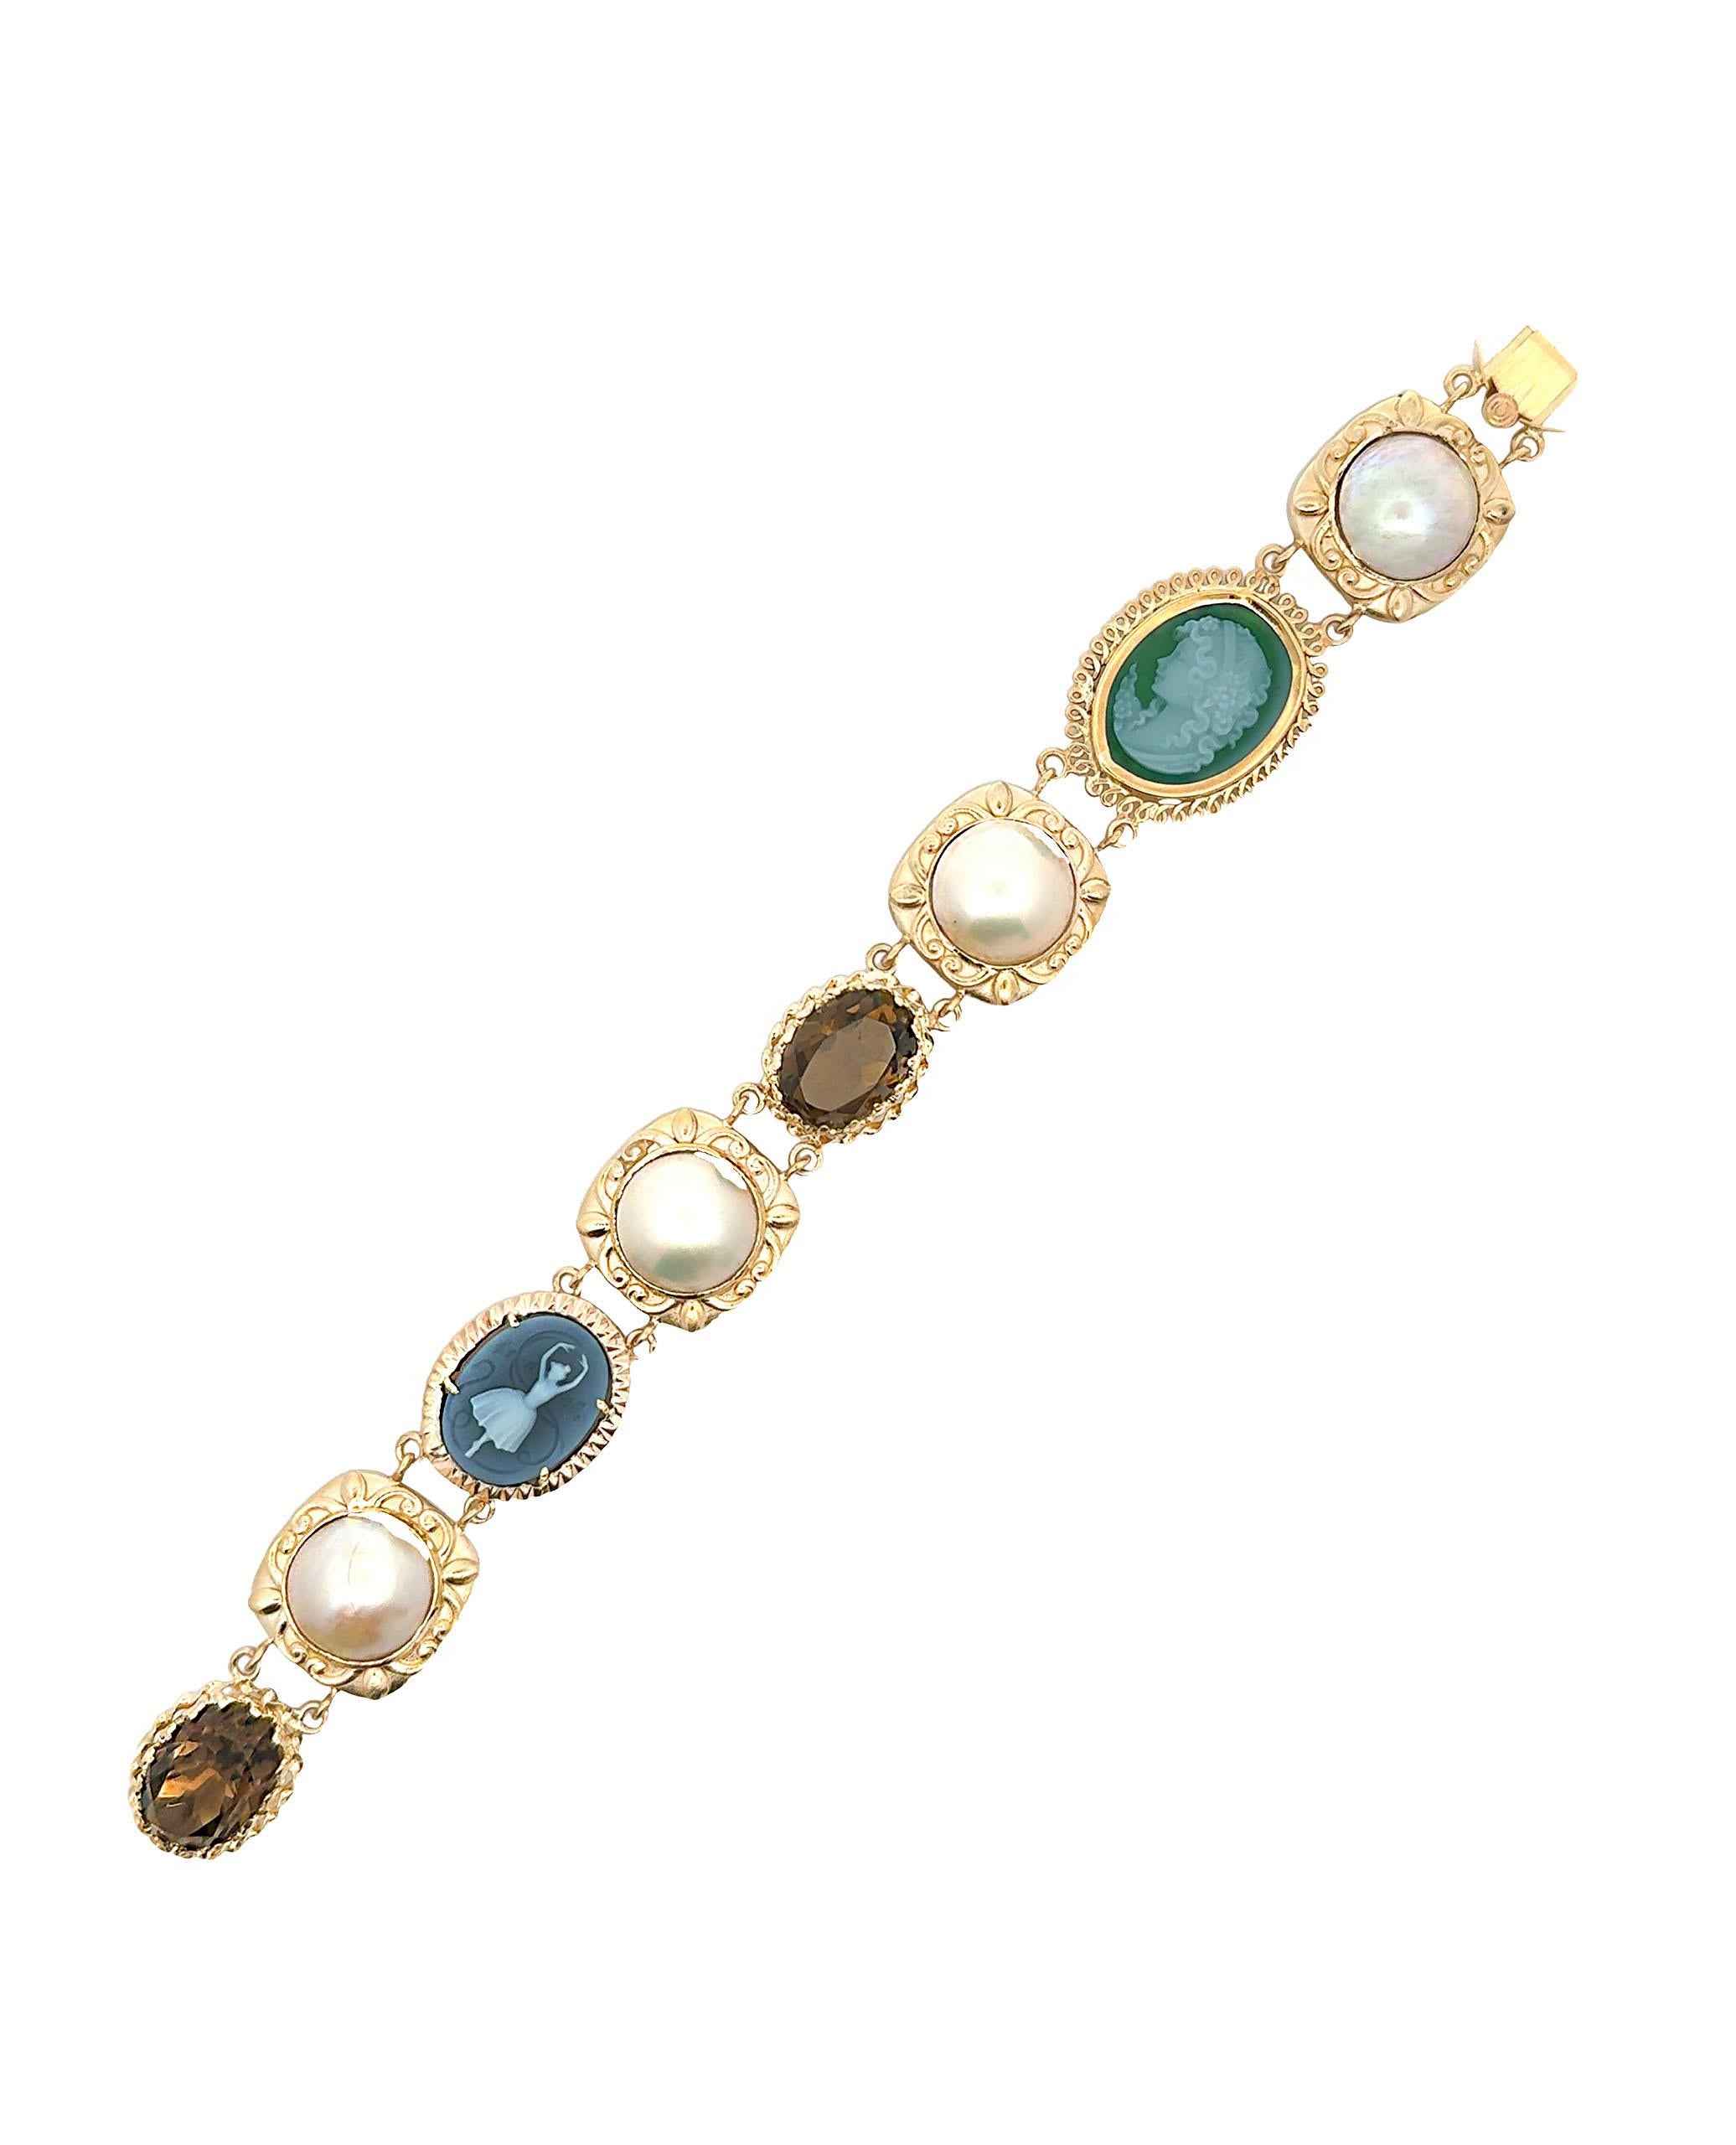 Women's Vintage Components -14K Yellow Gold Mobe Pearl, Cameo and Smokey Topaz Bracelet For Sale